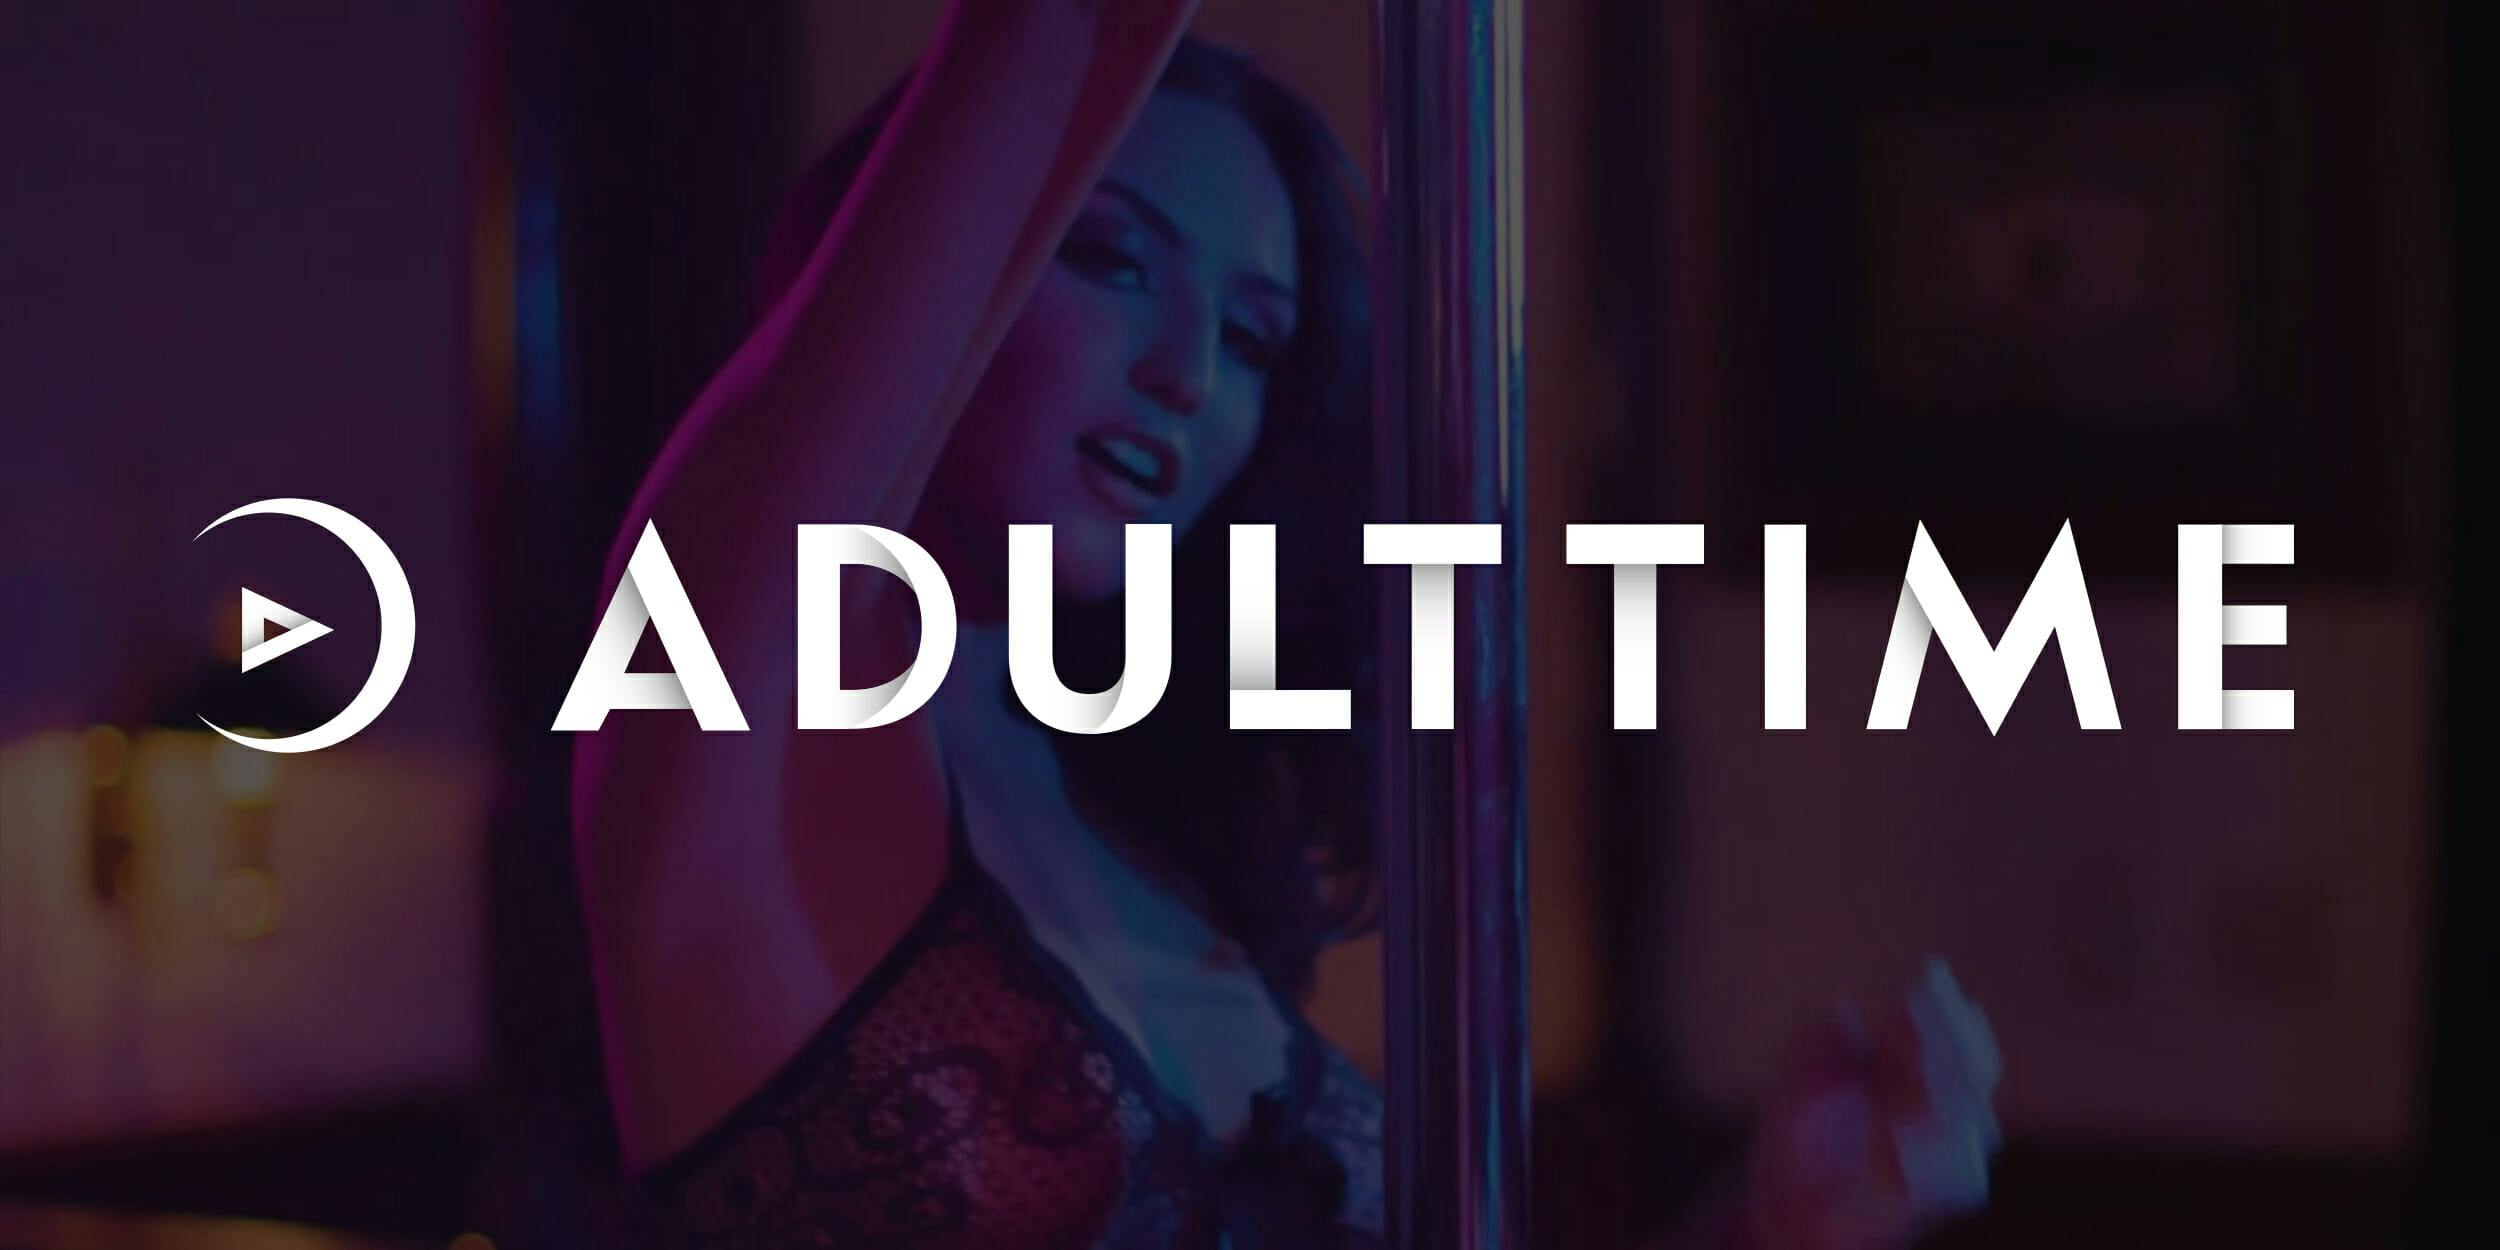 Adult Time is an endless buffet of both diverse and occasionally problematic porn